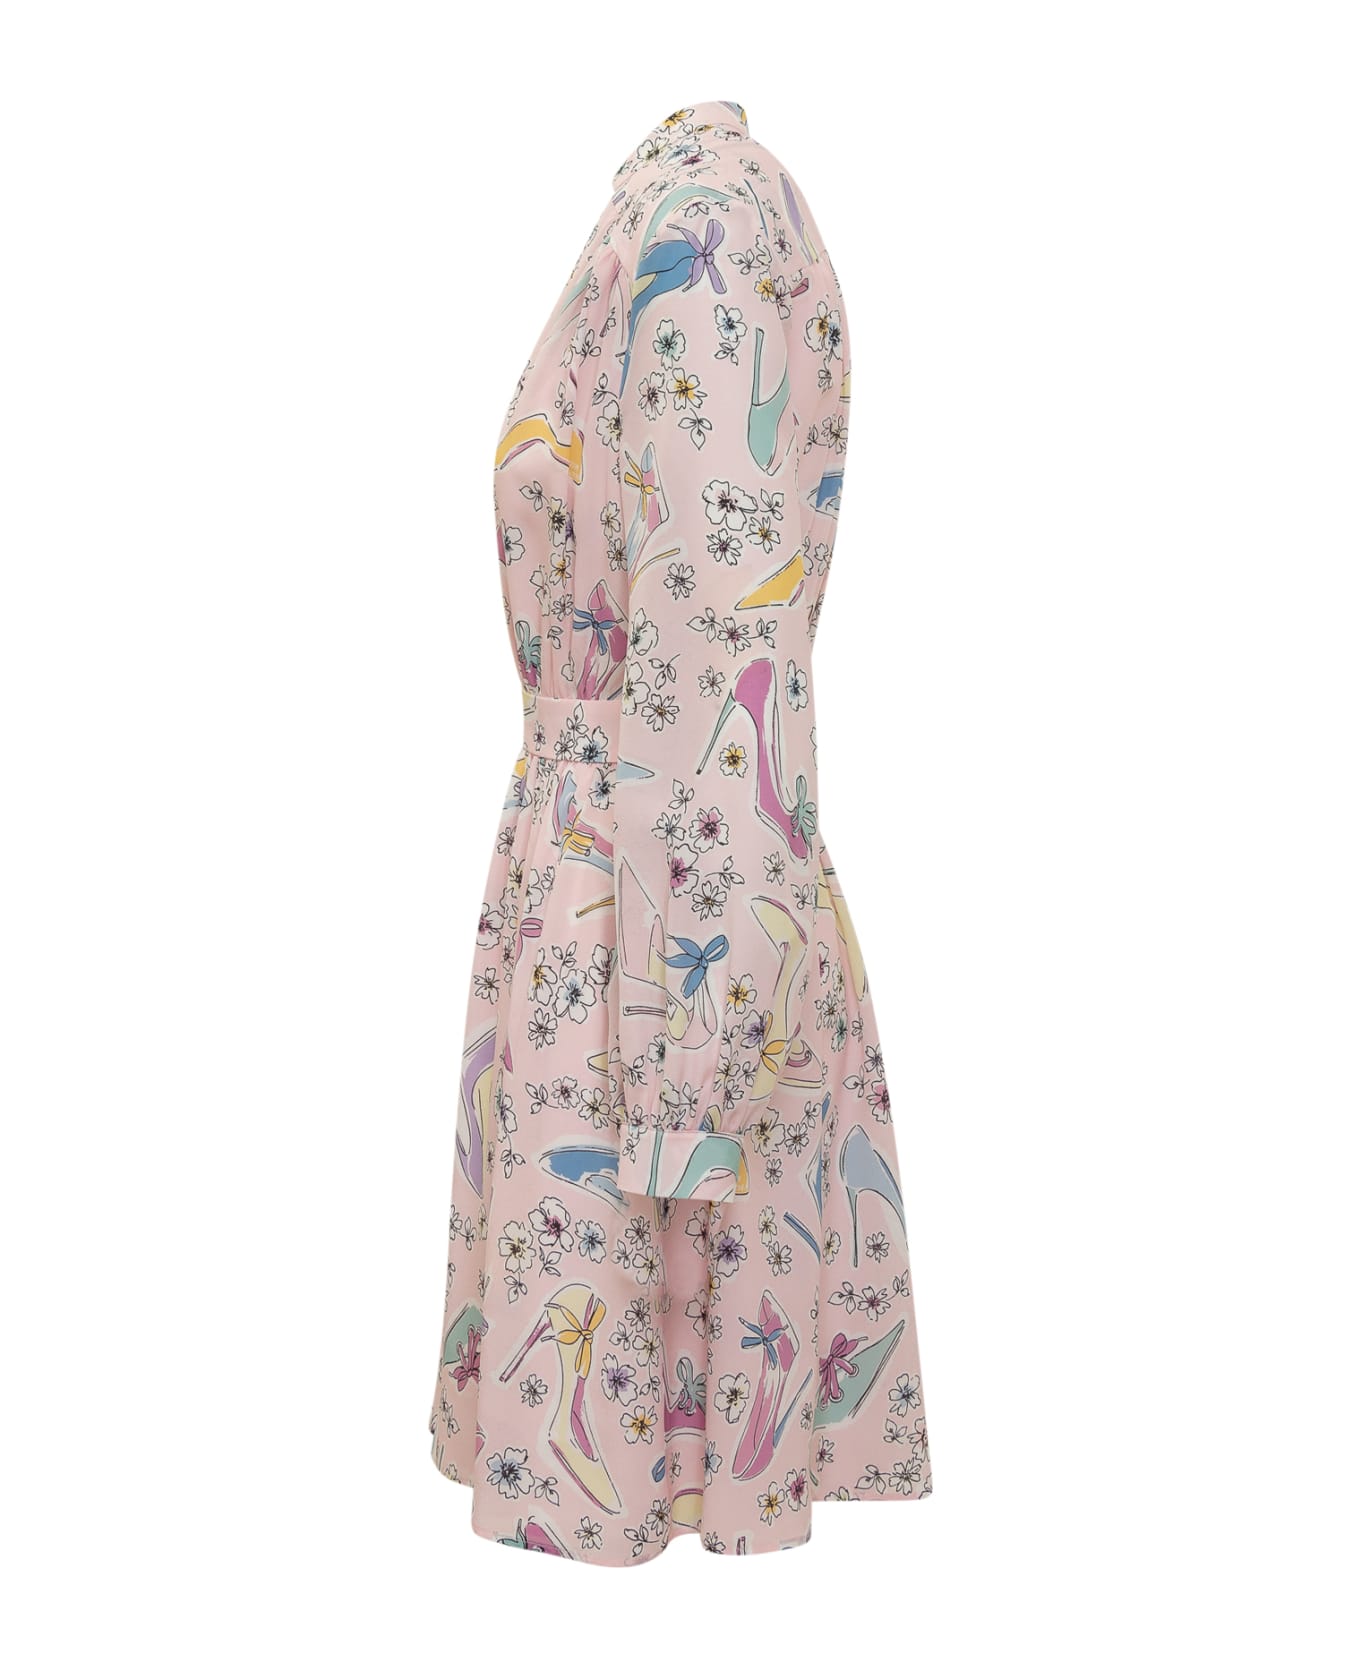 Boutique Moschino Dress With Pattern - ROSA